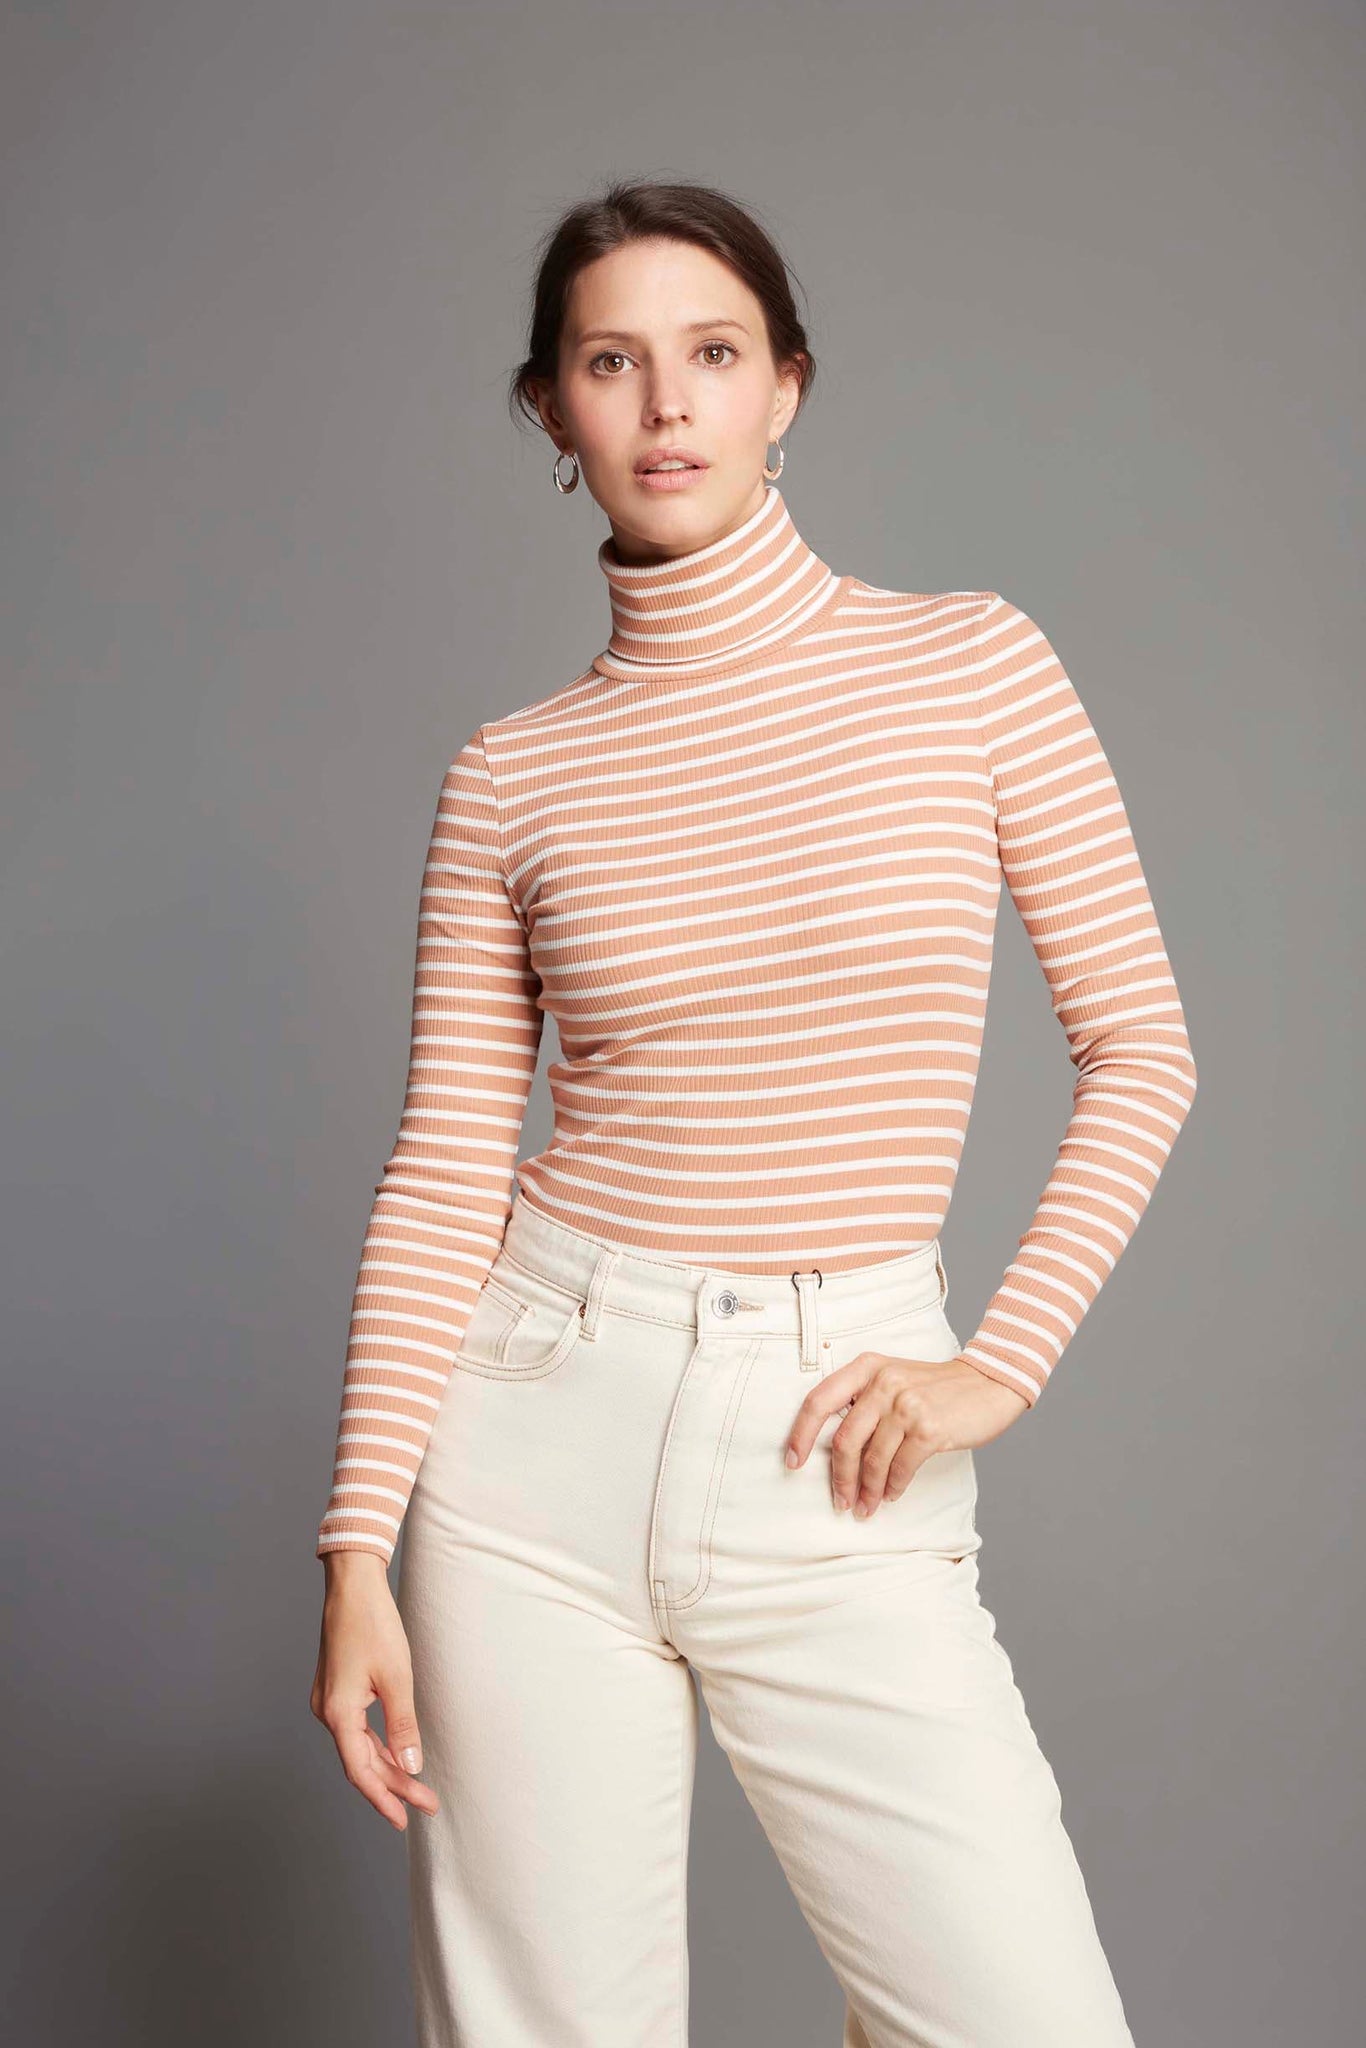 Women's Striped Cotton Roll Neck Top in Birch and Ecru - Quality Stripe Roll Neck Top -  Long Sleeve Roll Neck top by Lavender Hill Clothing